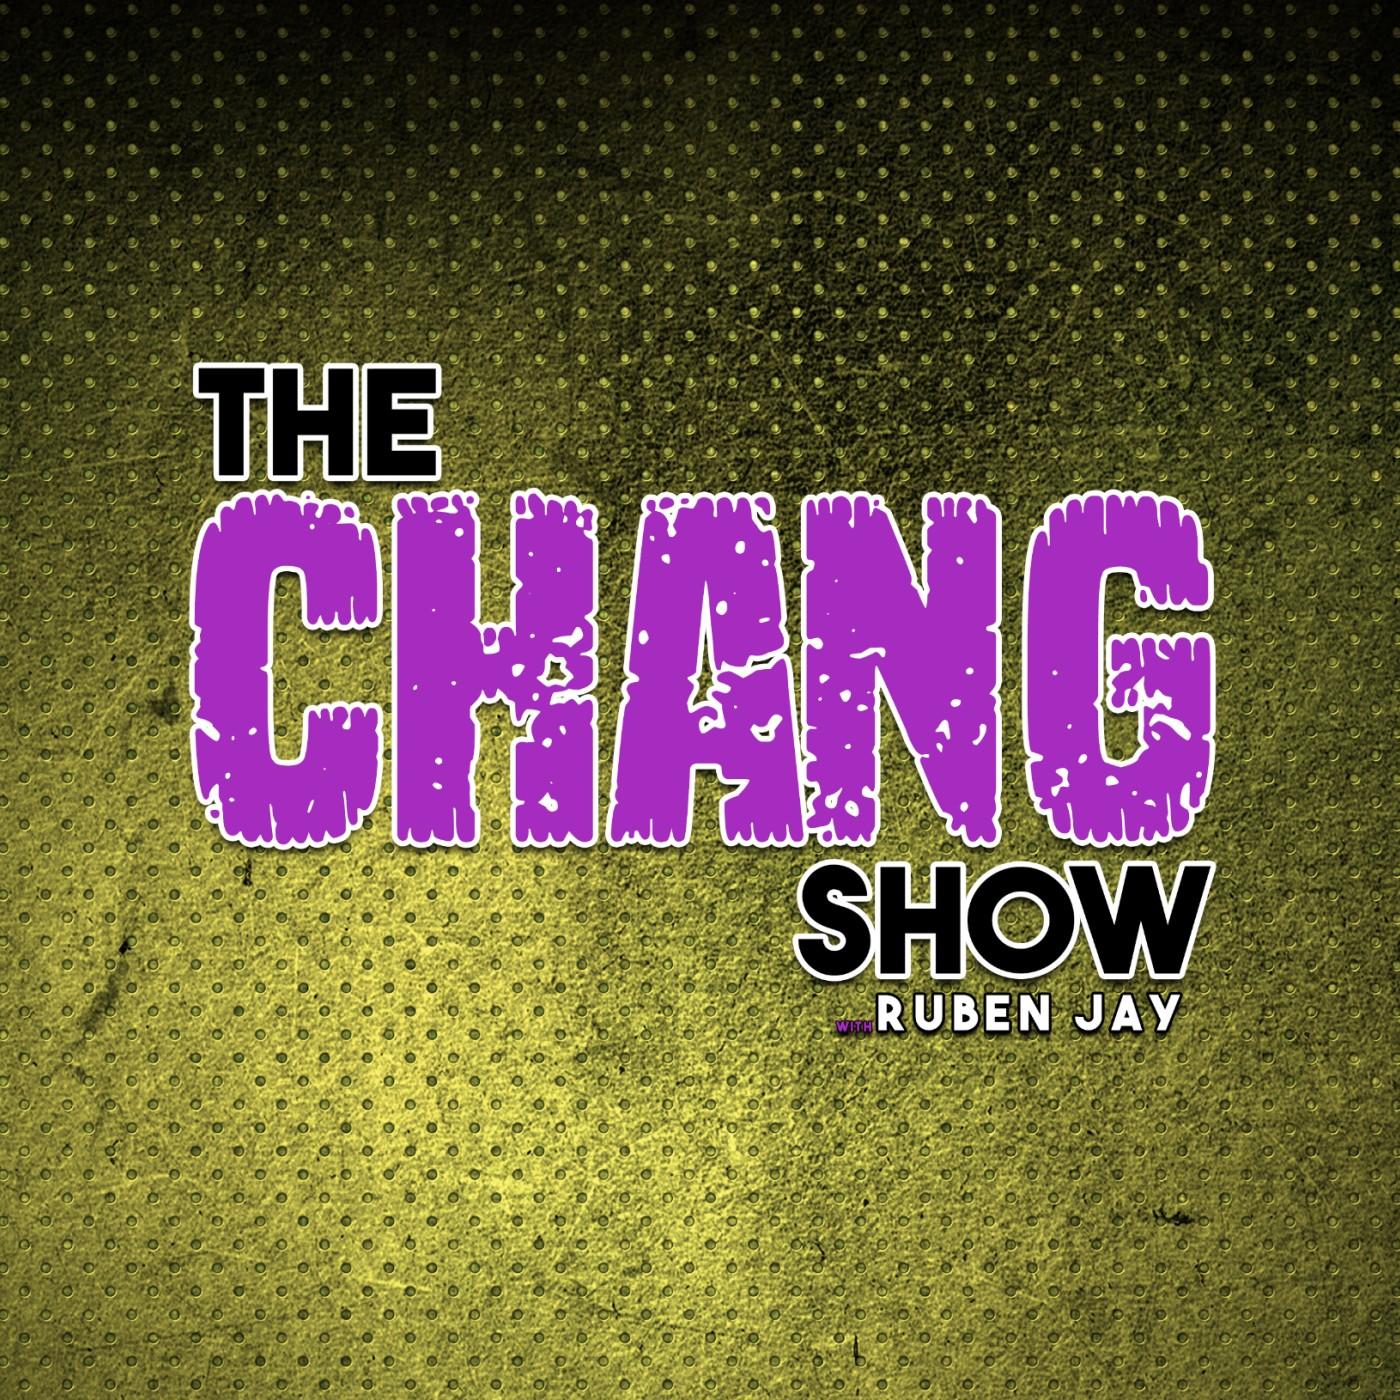 The Chang Show